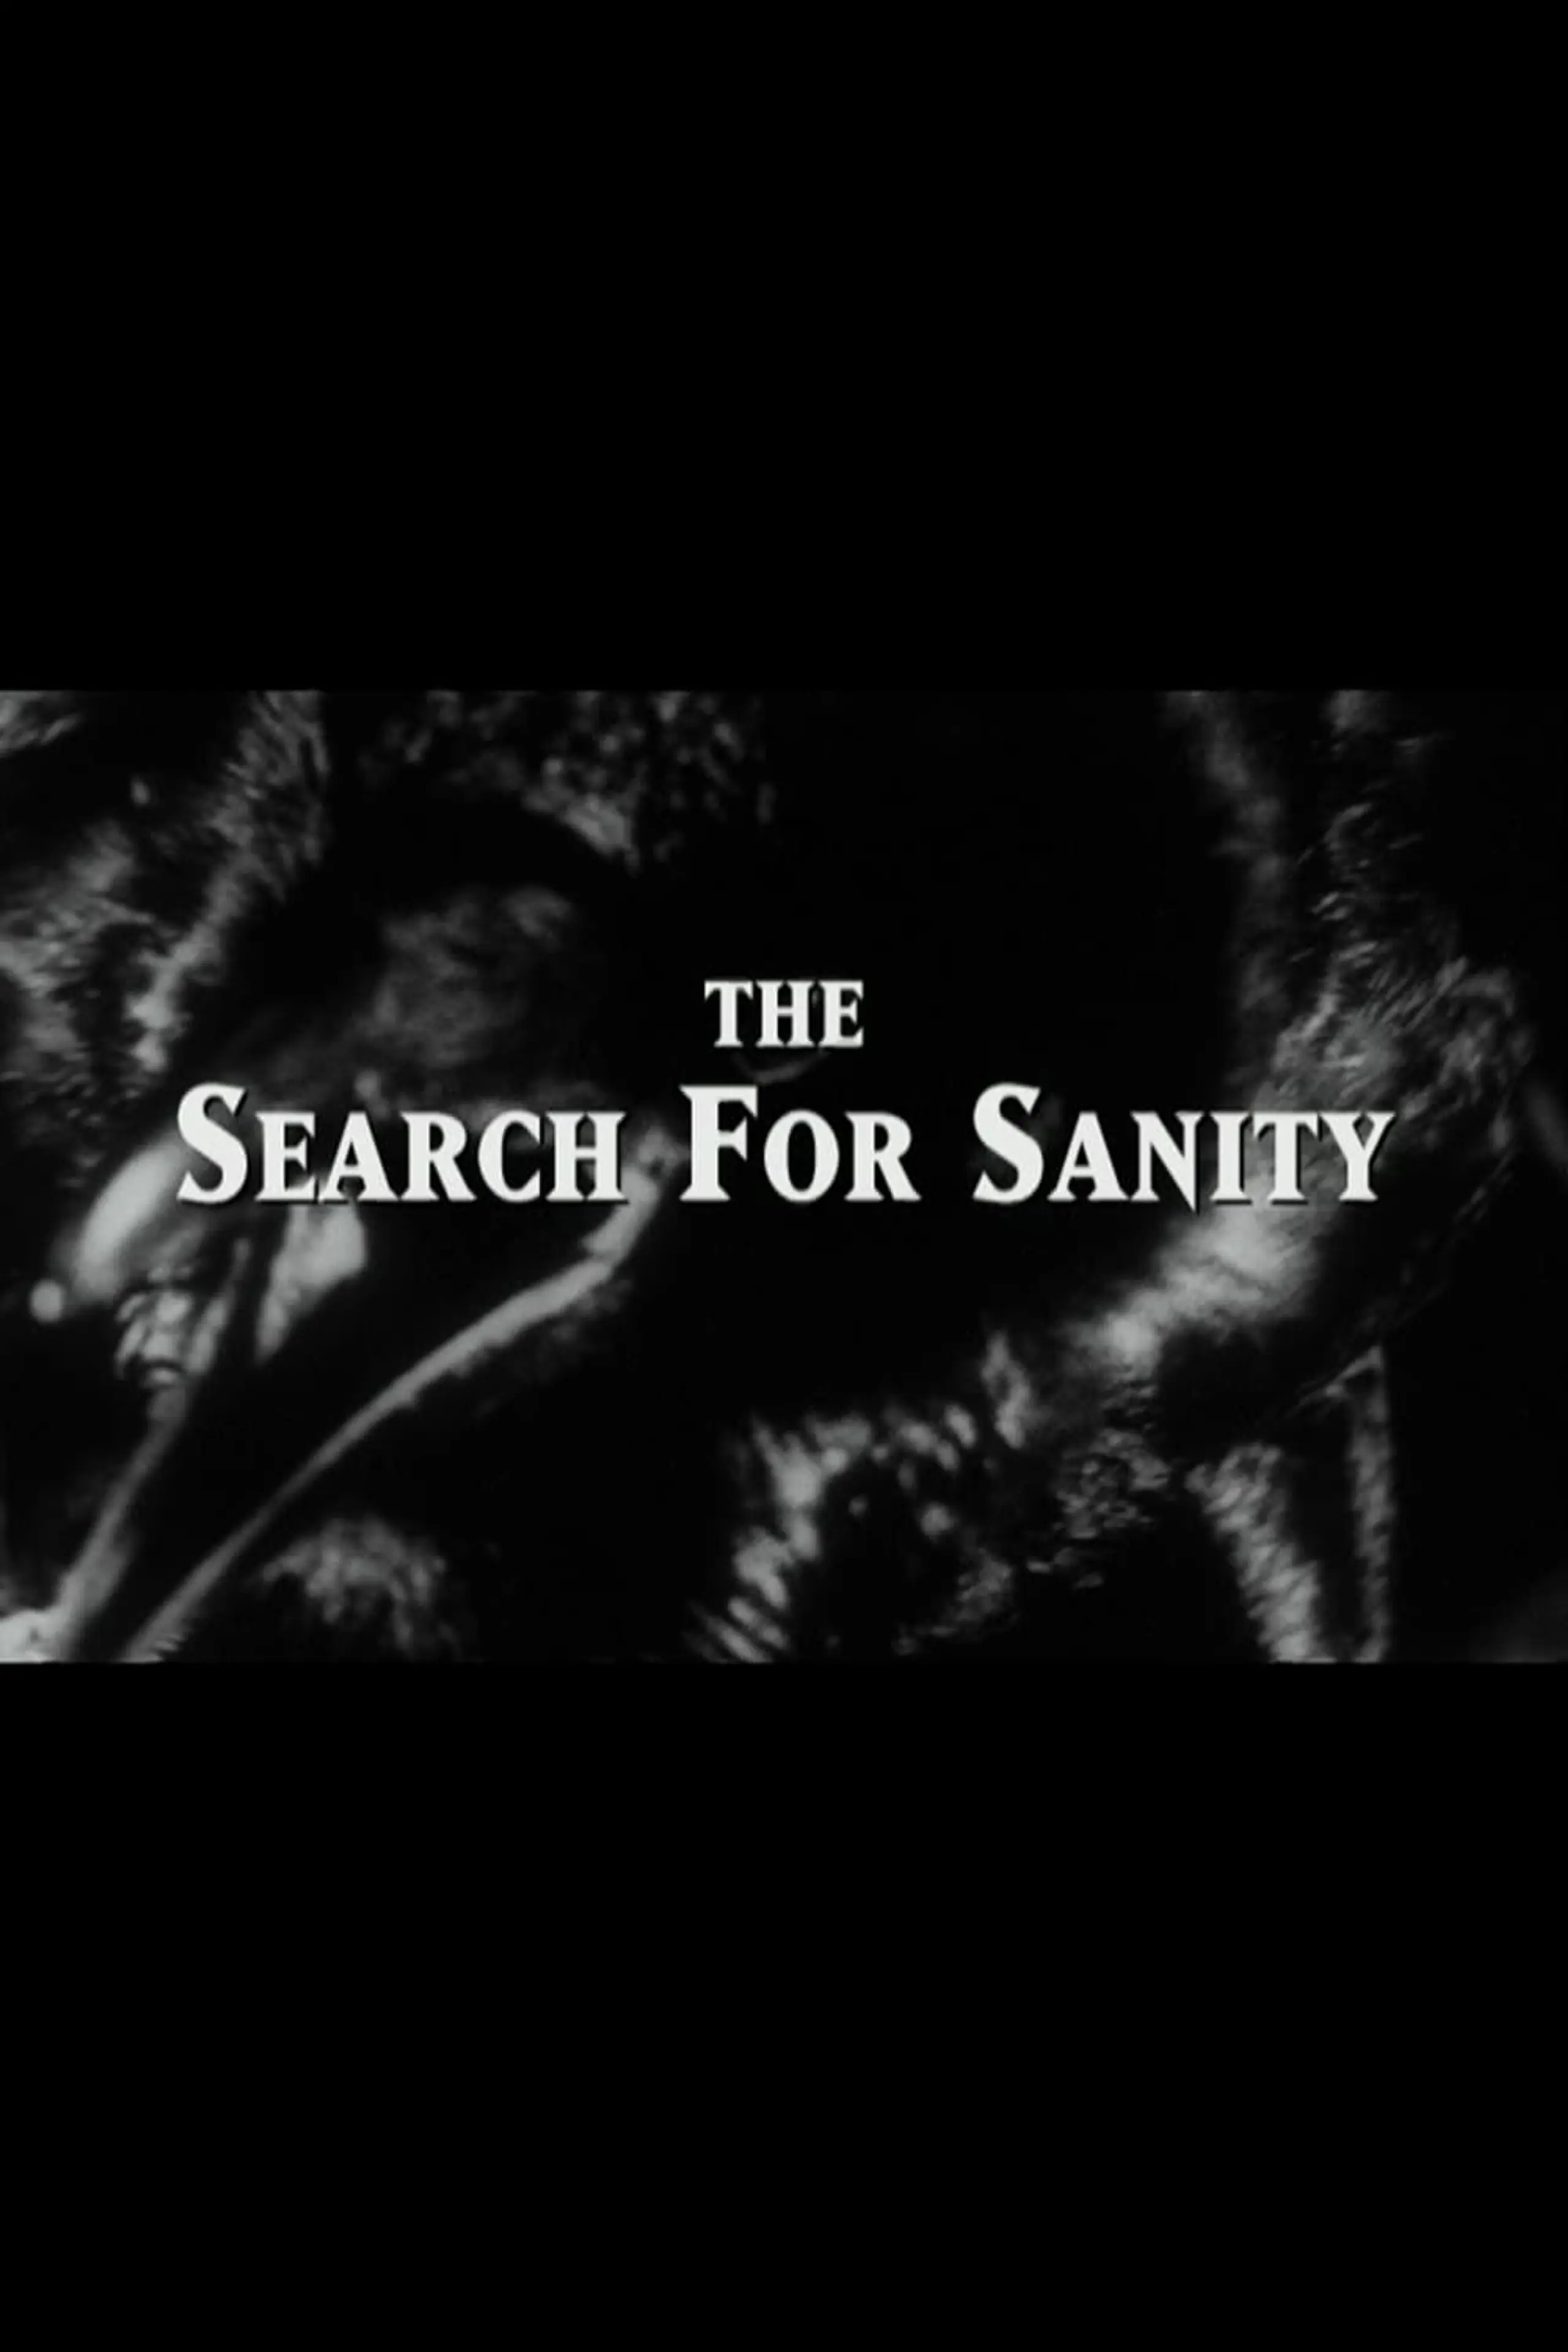 The Search for Sanity